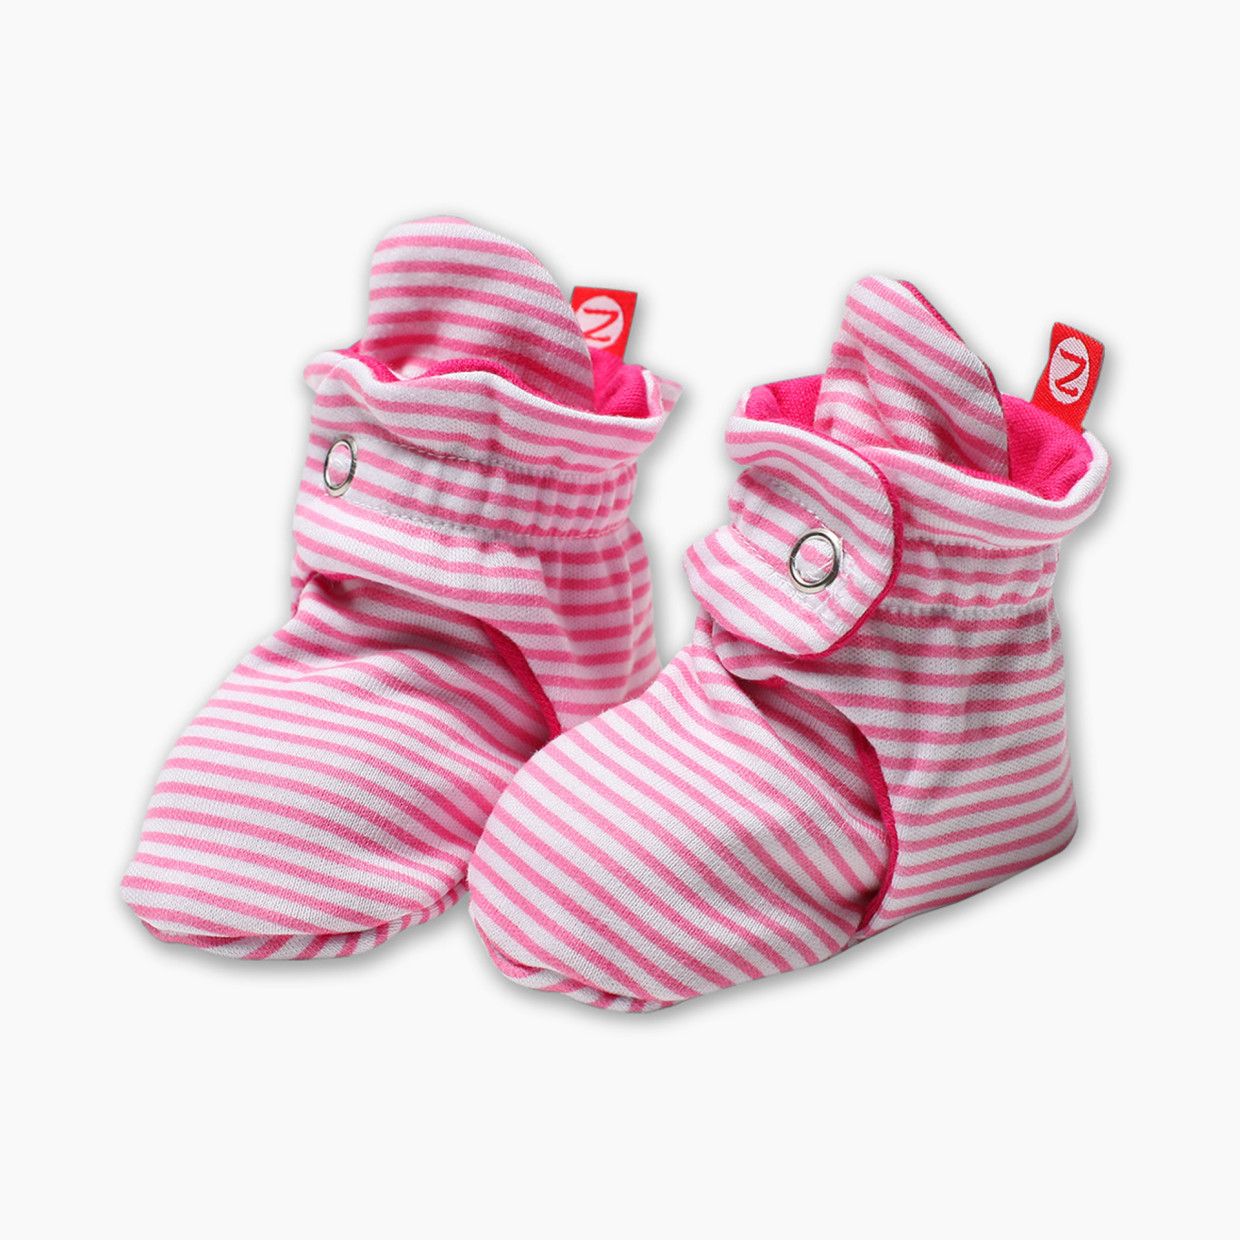 Zutano Candy Stripe Cotton Baby Booties - Hot Pink, 3-6 Months.